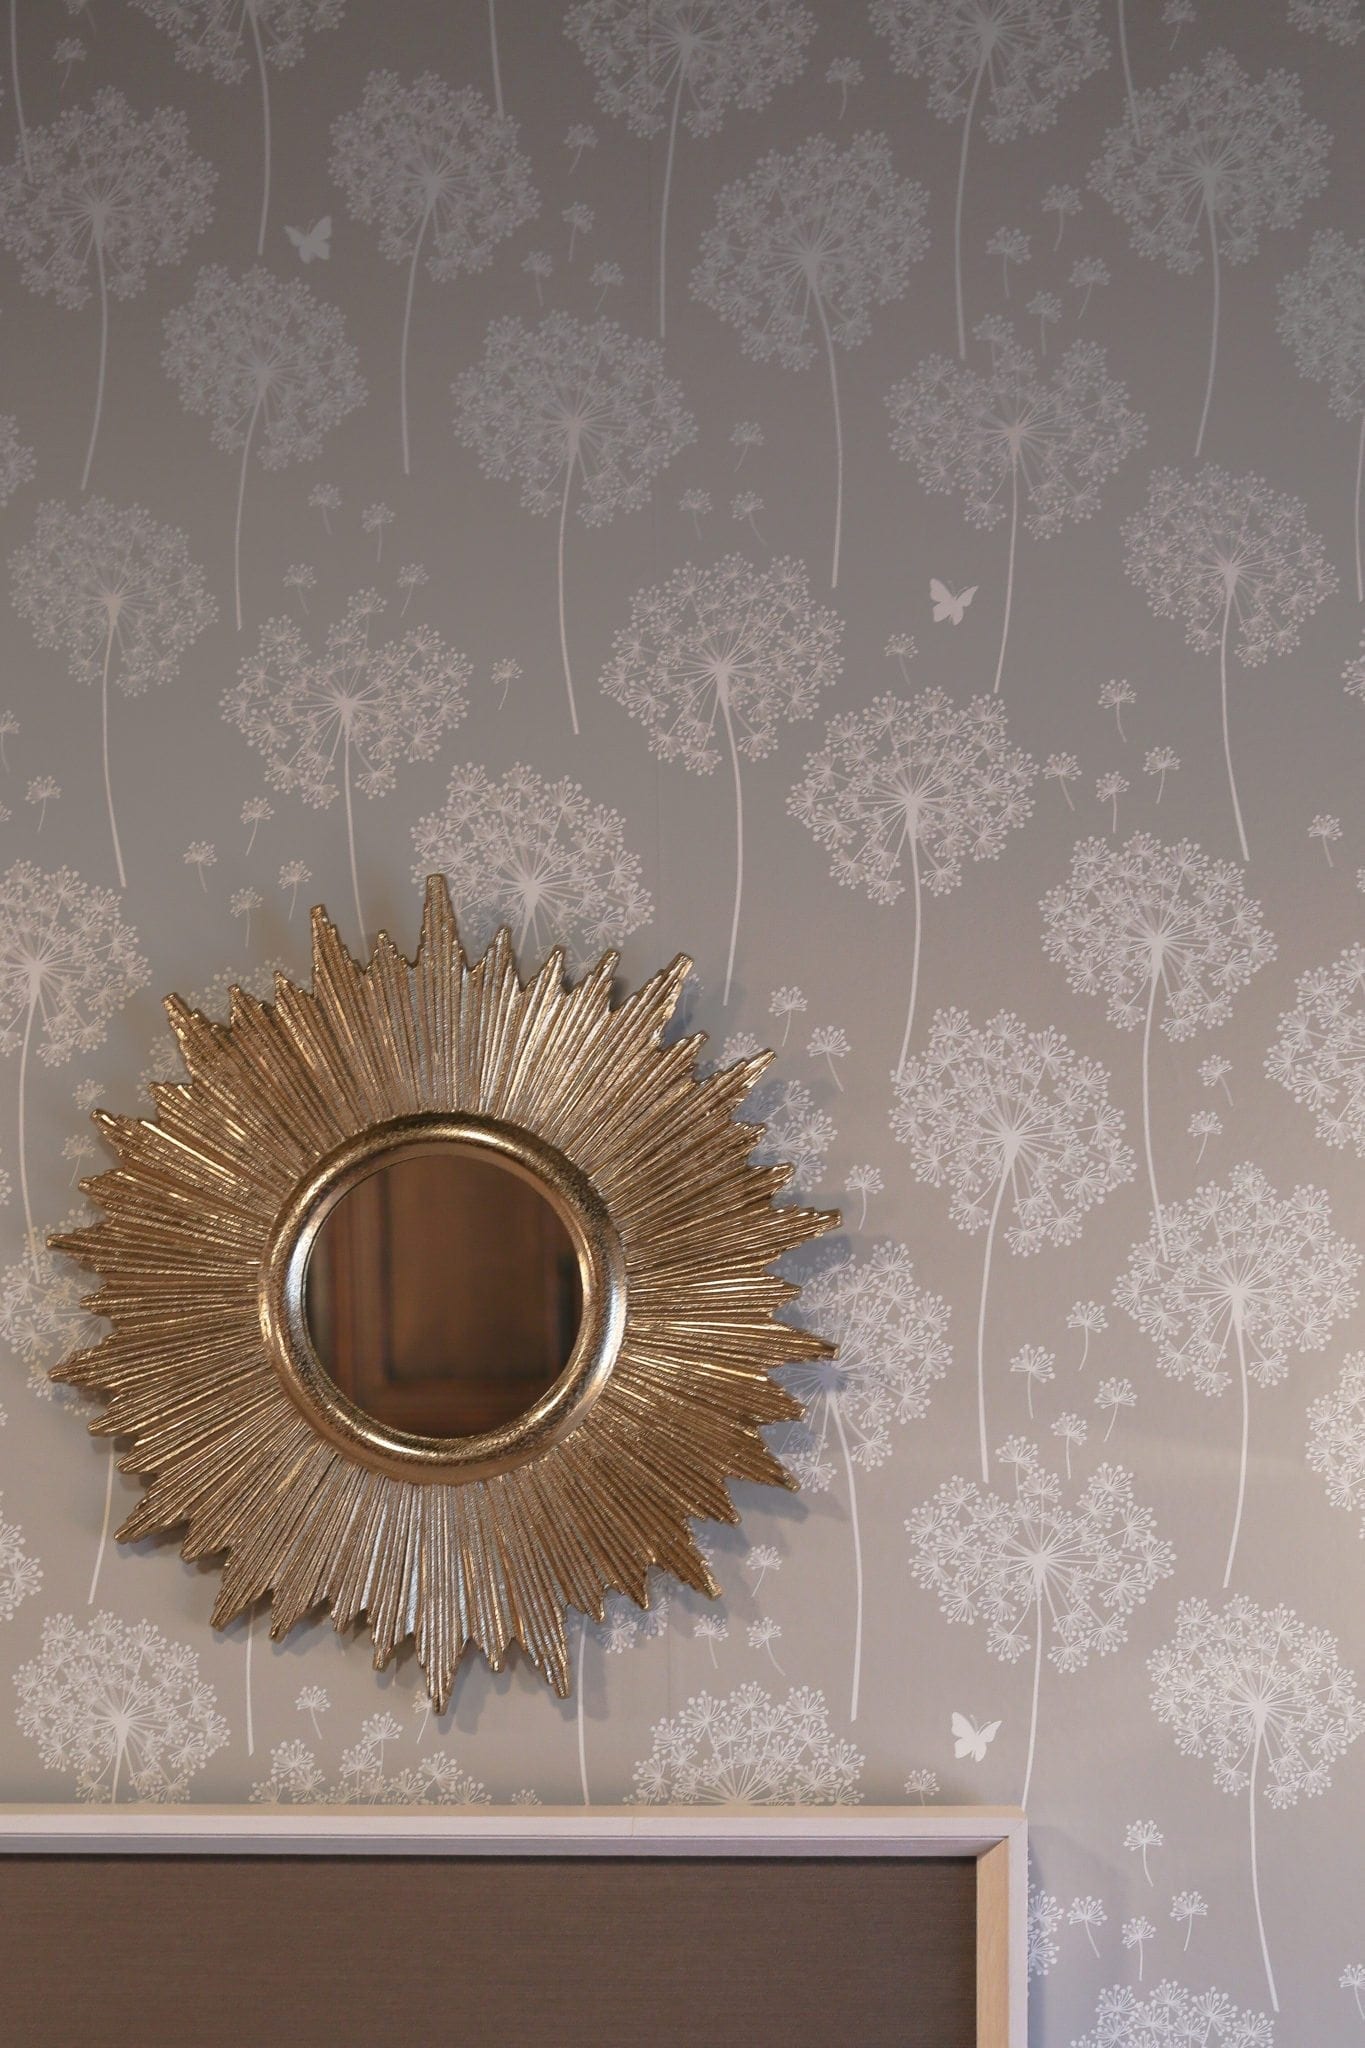 Starburst gold mirror with gray reusable wallpaper.